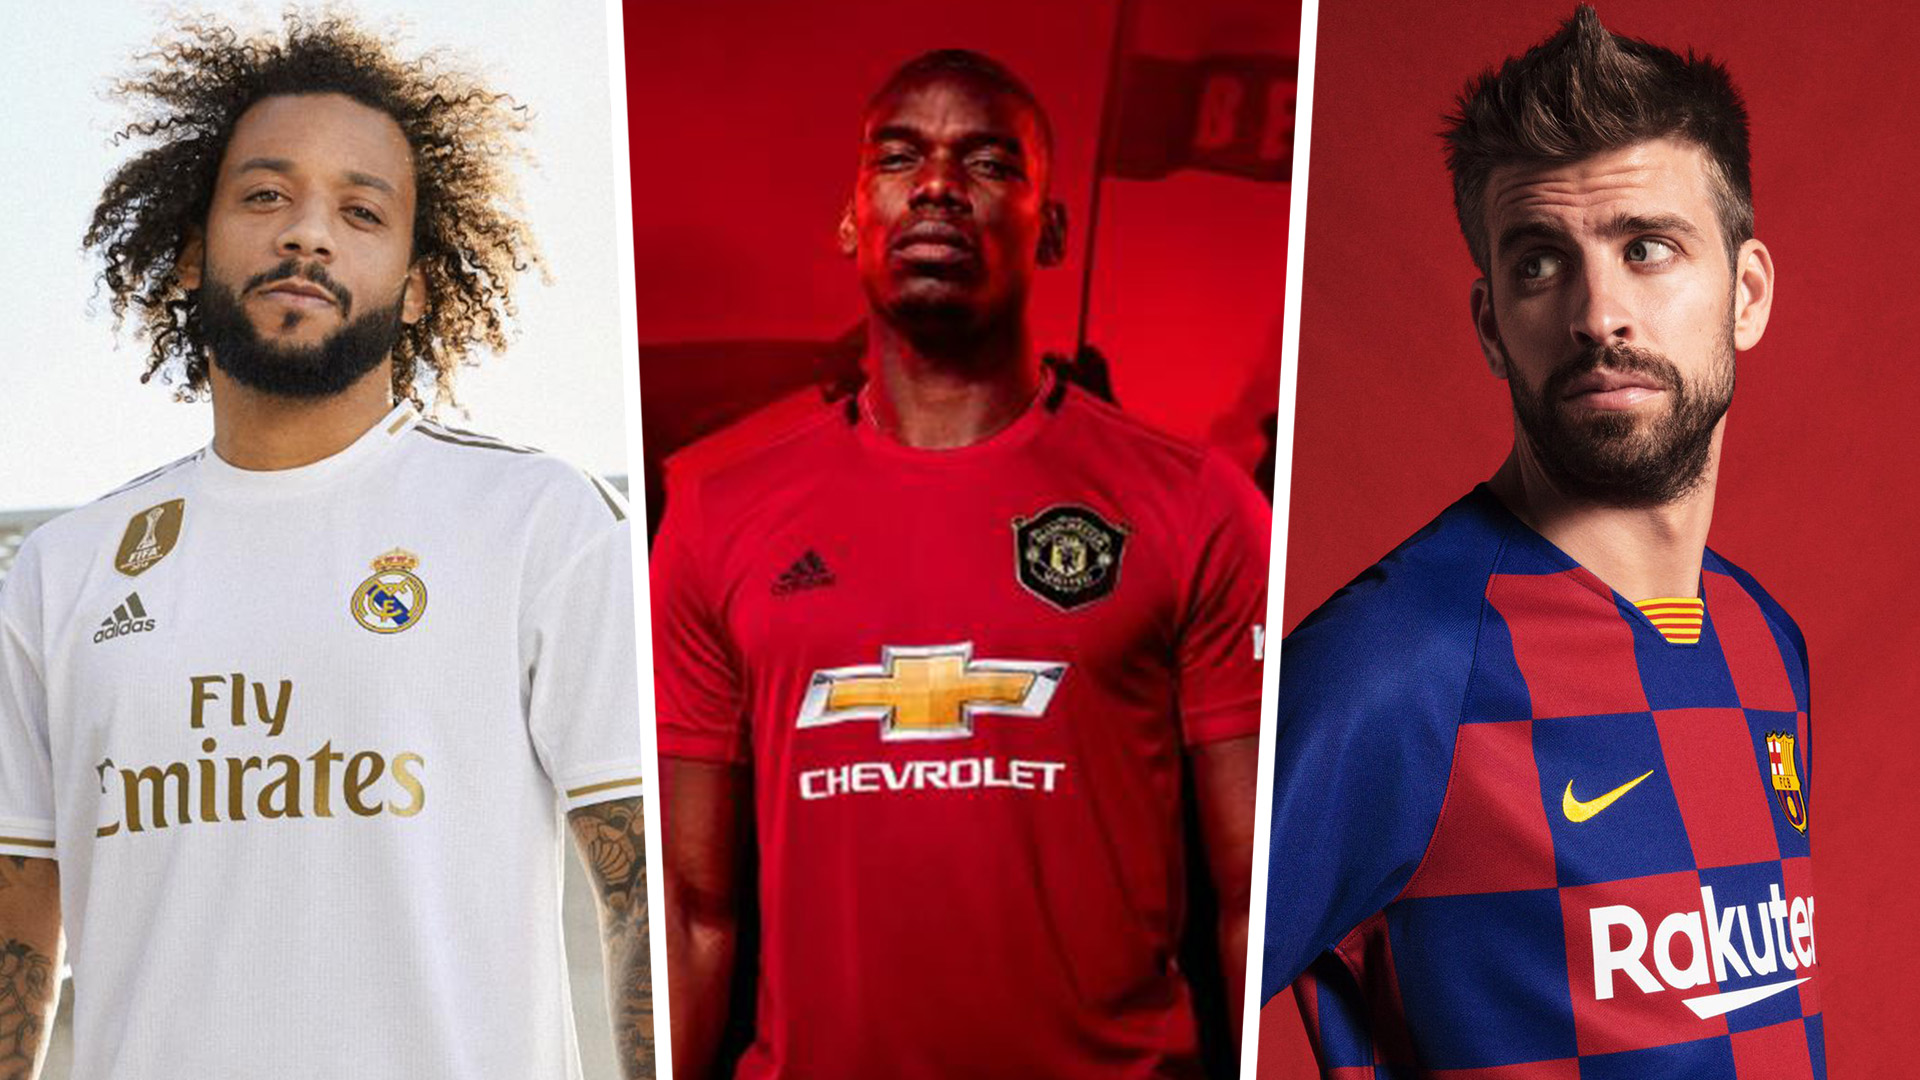 New 2019 20 Football Kits Real Madrid Manchester United Barcelona All The Top Clubs Shirts Jerseys Revealed Goal Com